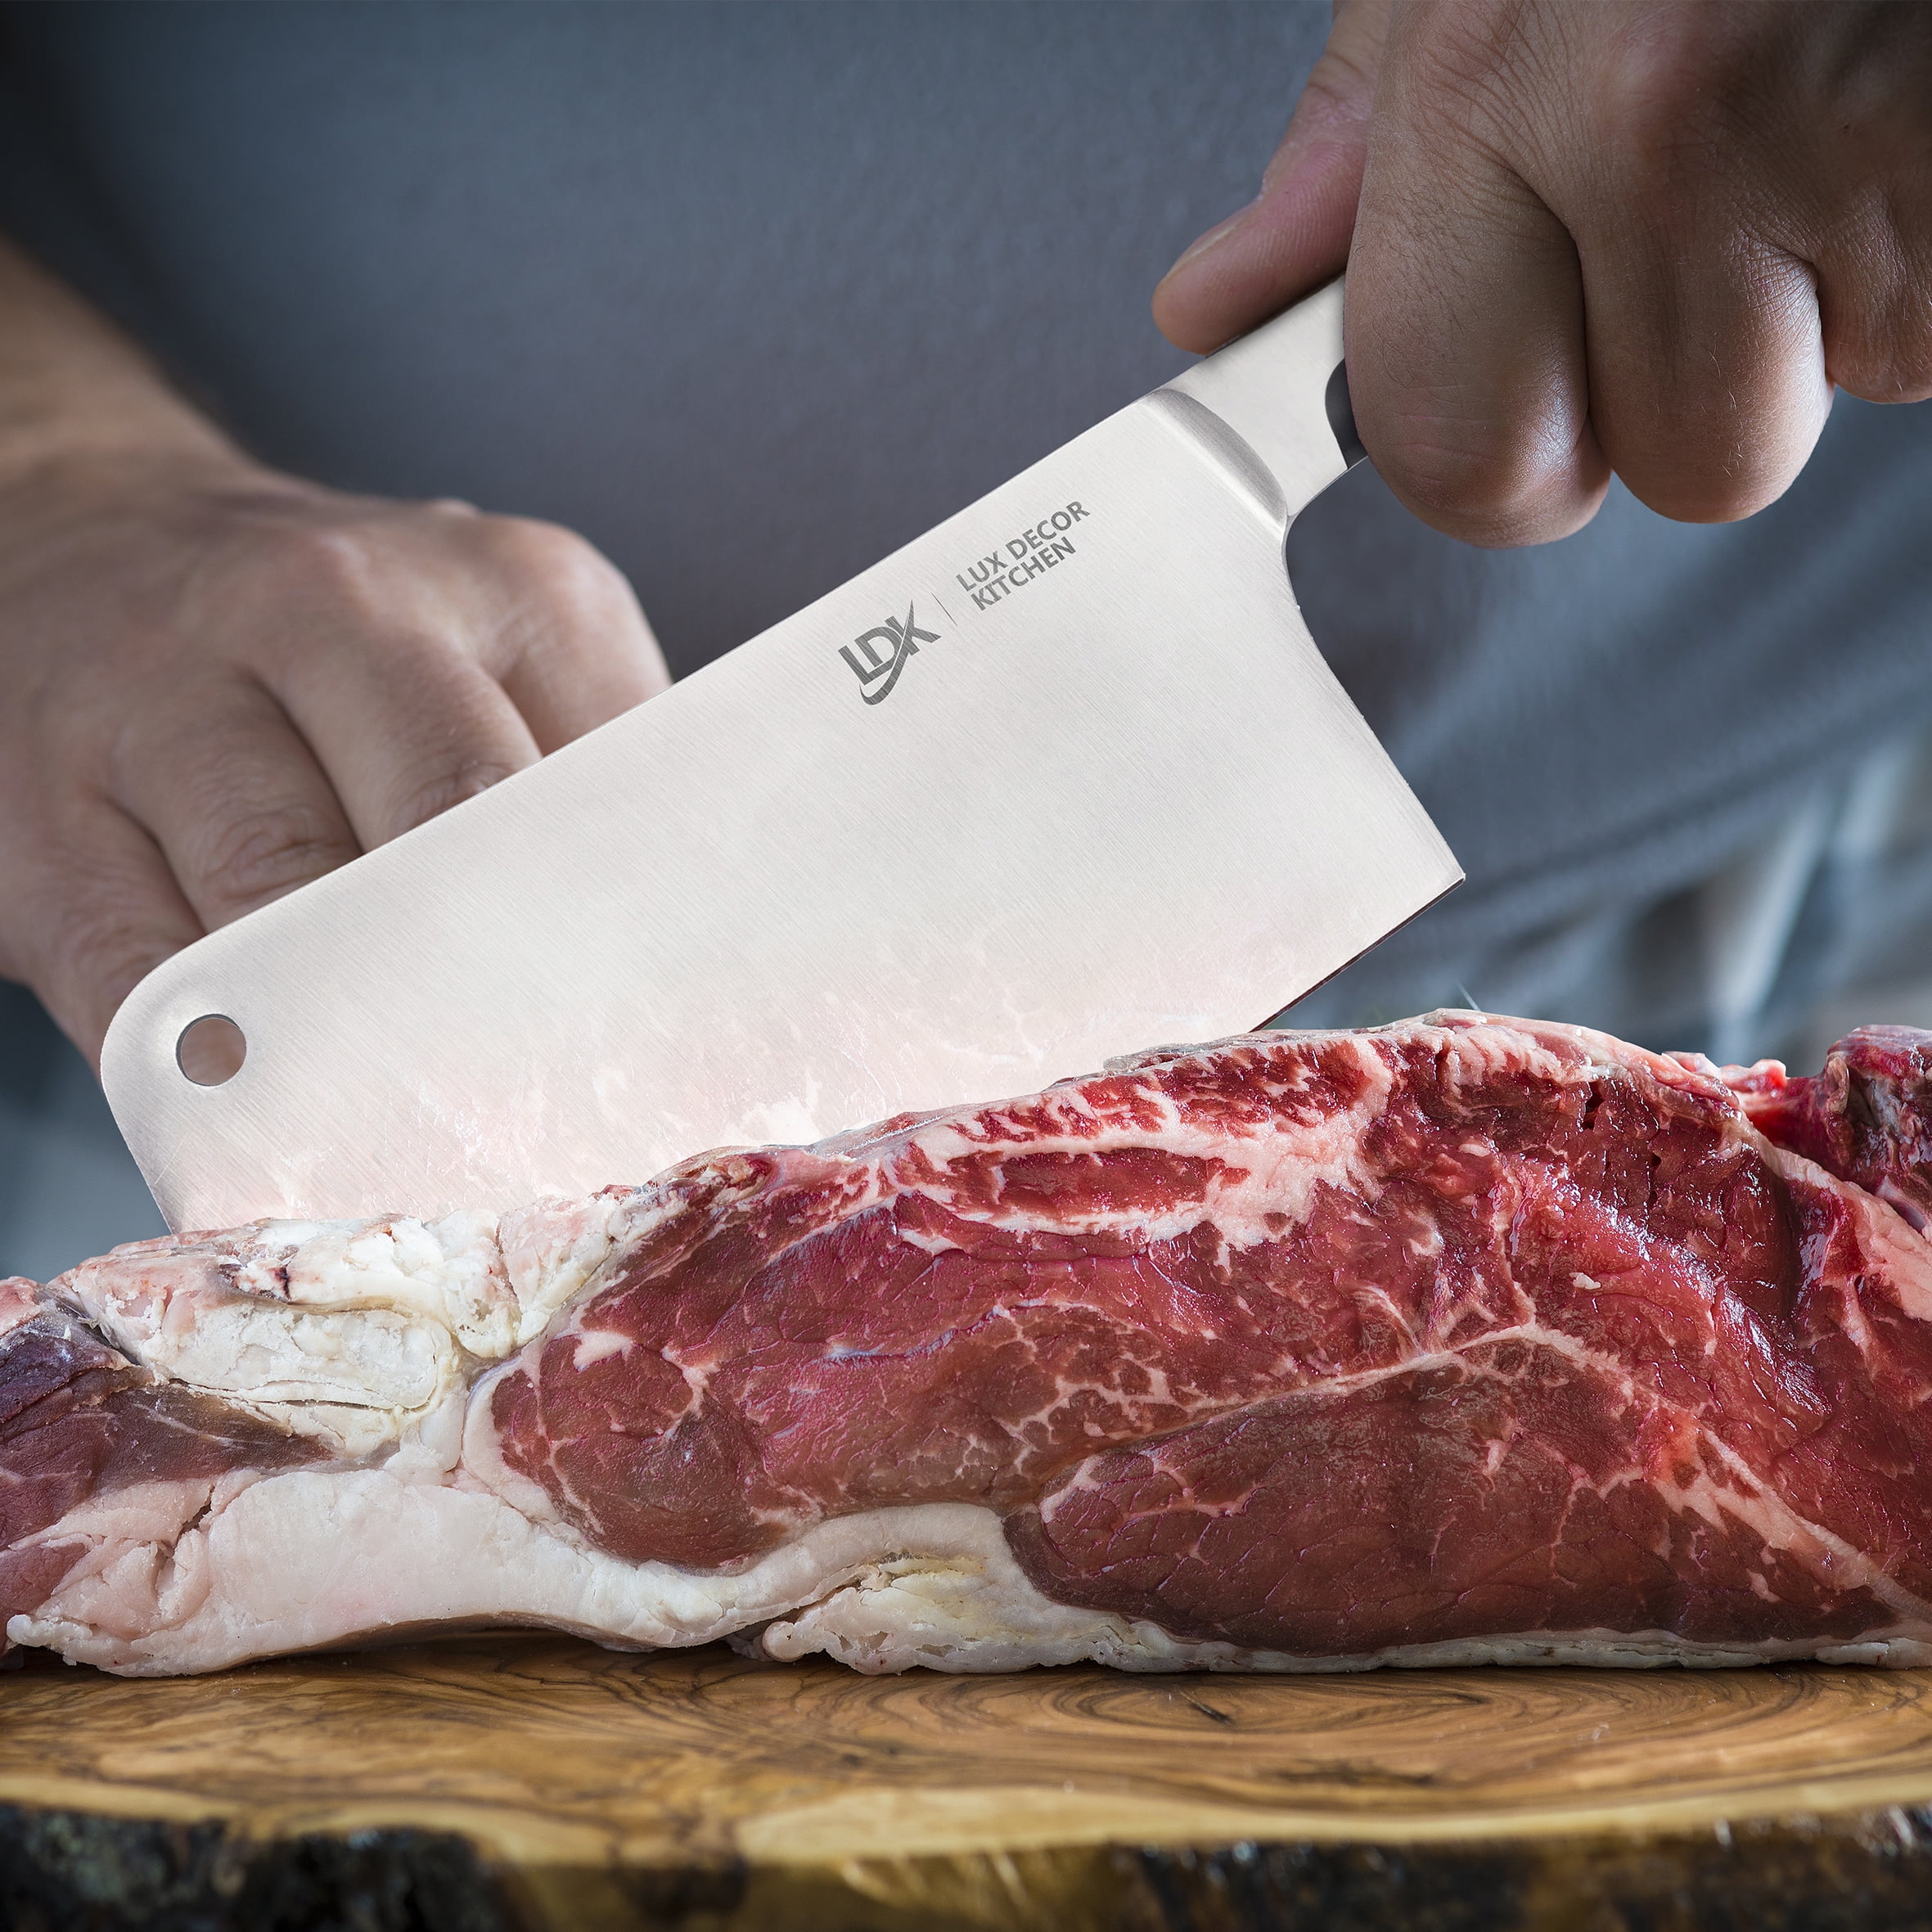 The Warehouse Place - Heavy Duty Stainless Steel Meat Cleaver